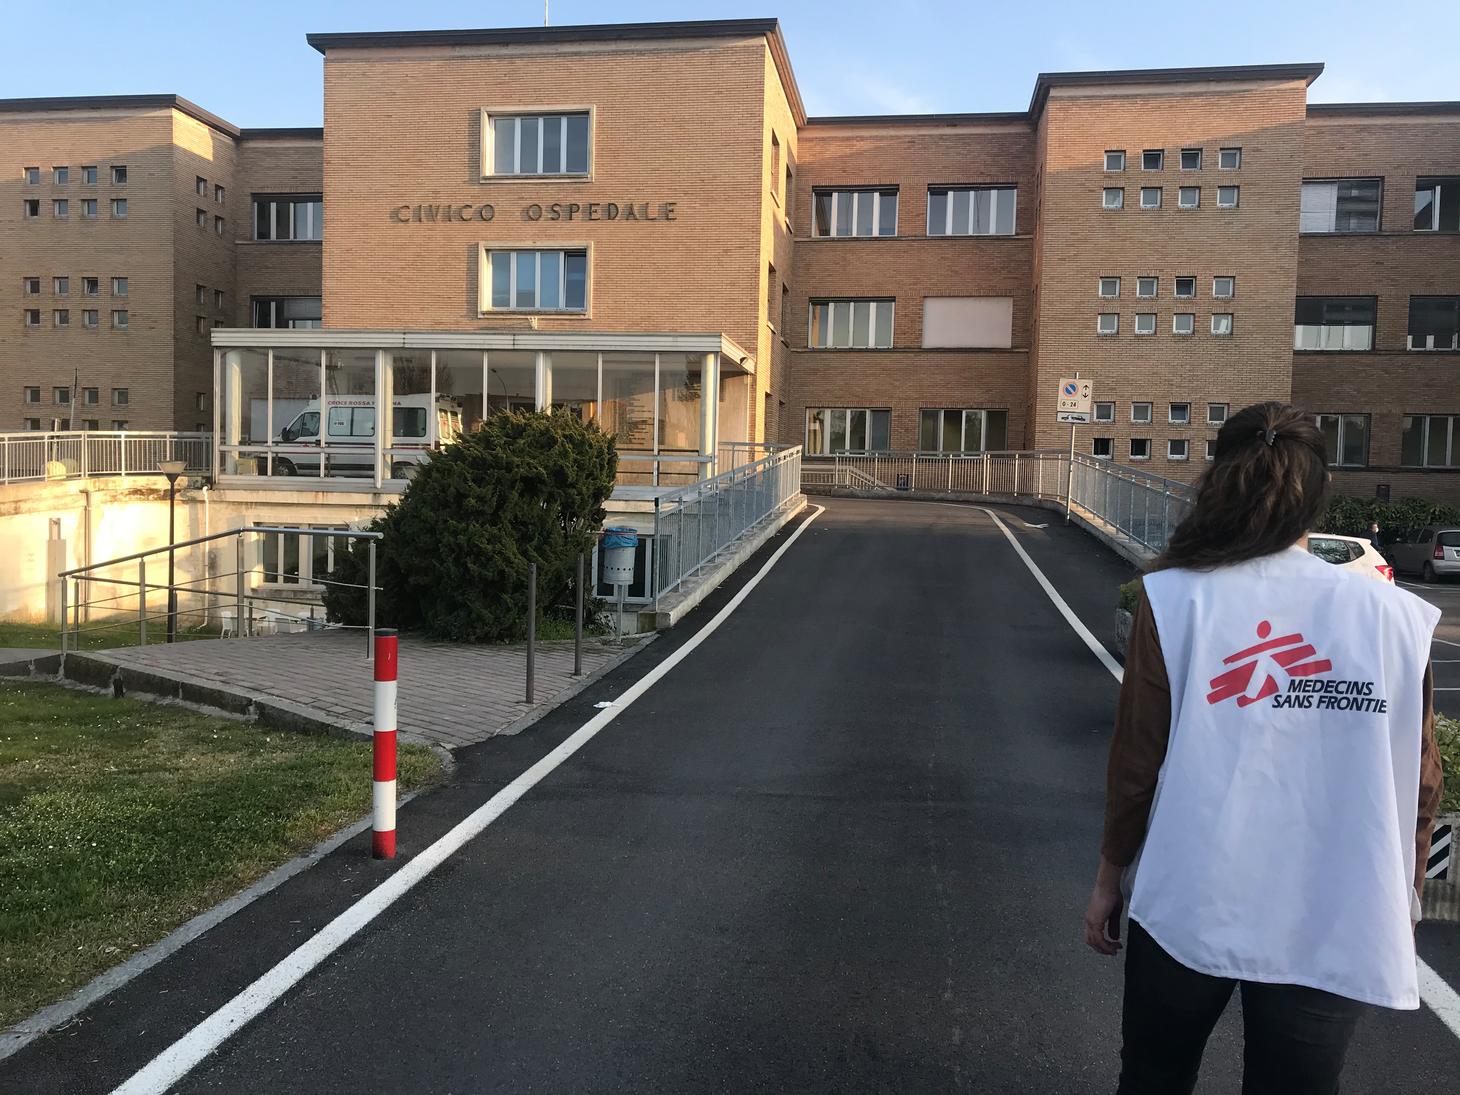 Nurse Carlotta, who has not worked in Italy for a long time, is now happy to be able to do her part in her country and to see so much solidarity between our doctors and our teams.